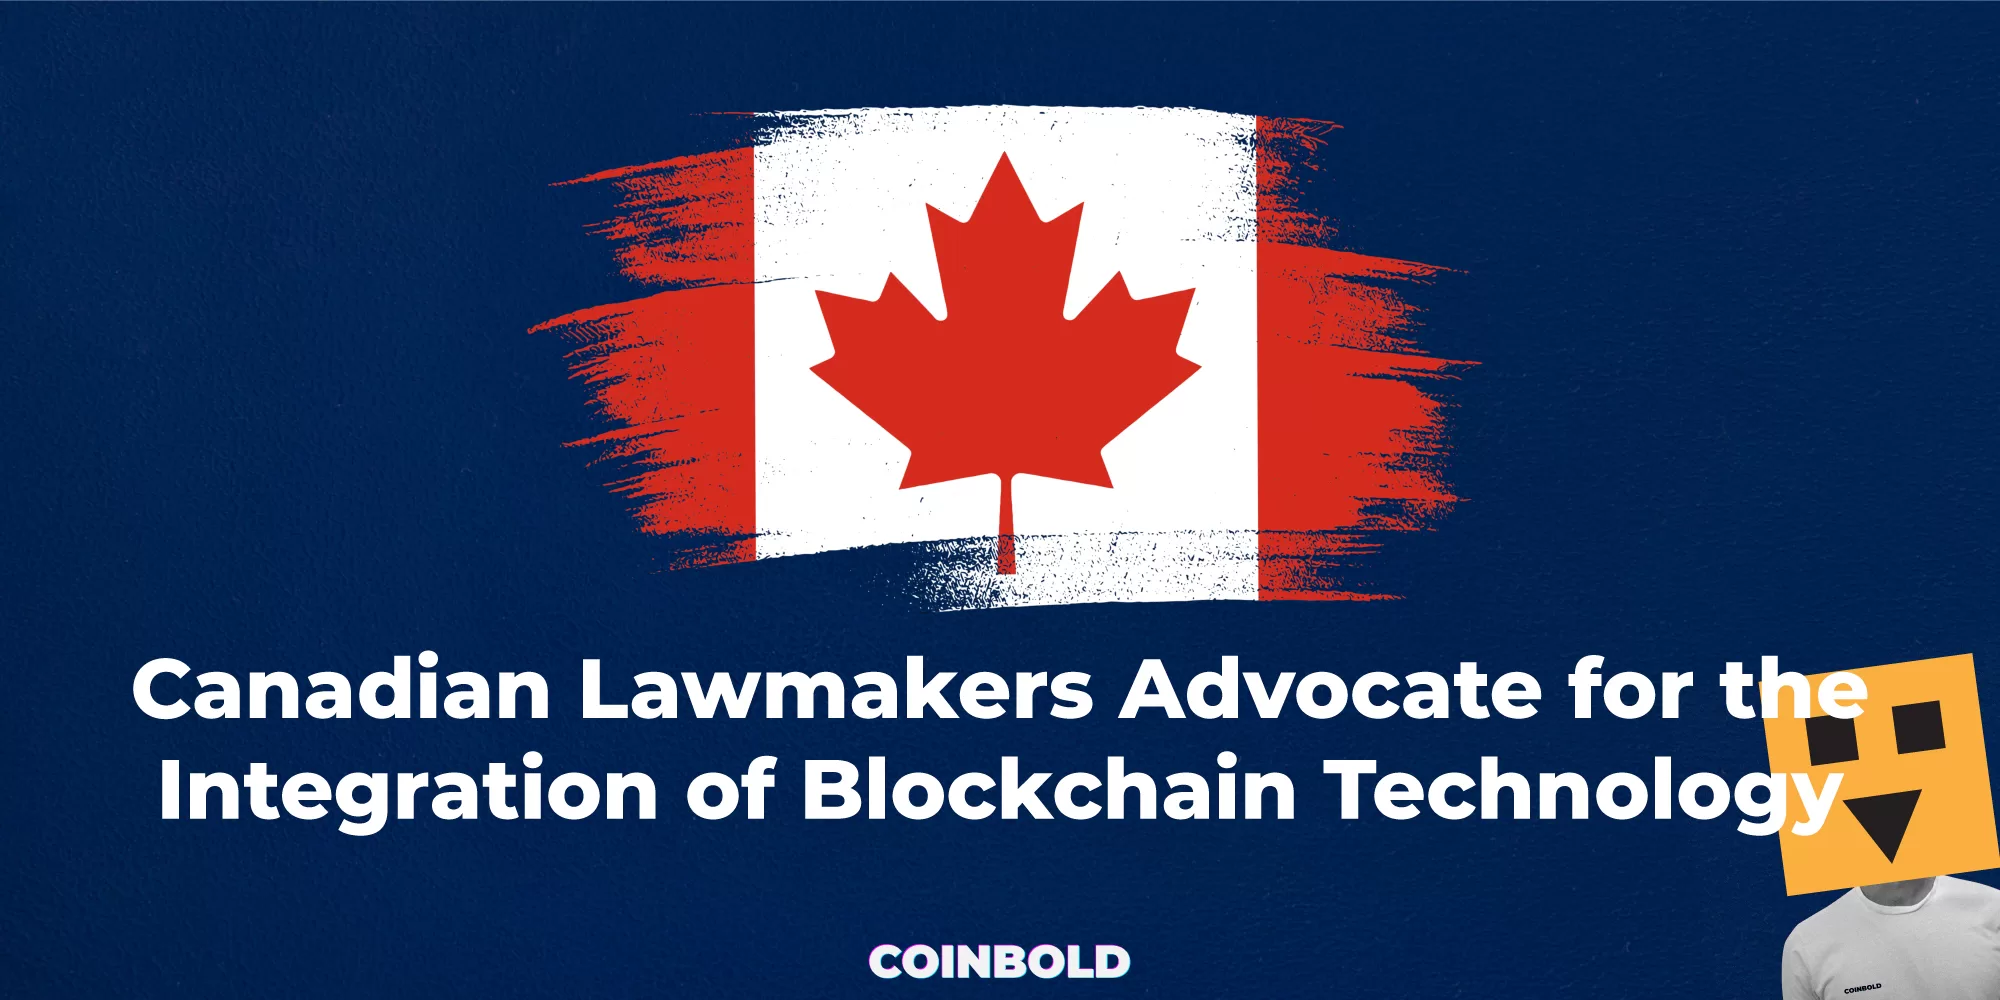 Canadian Lawmakers Advocate for the Integration of Blockchain Technology